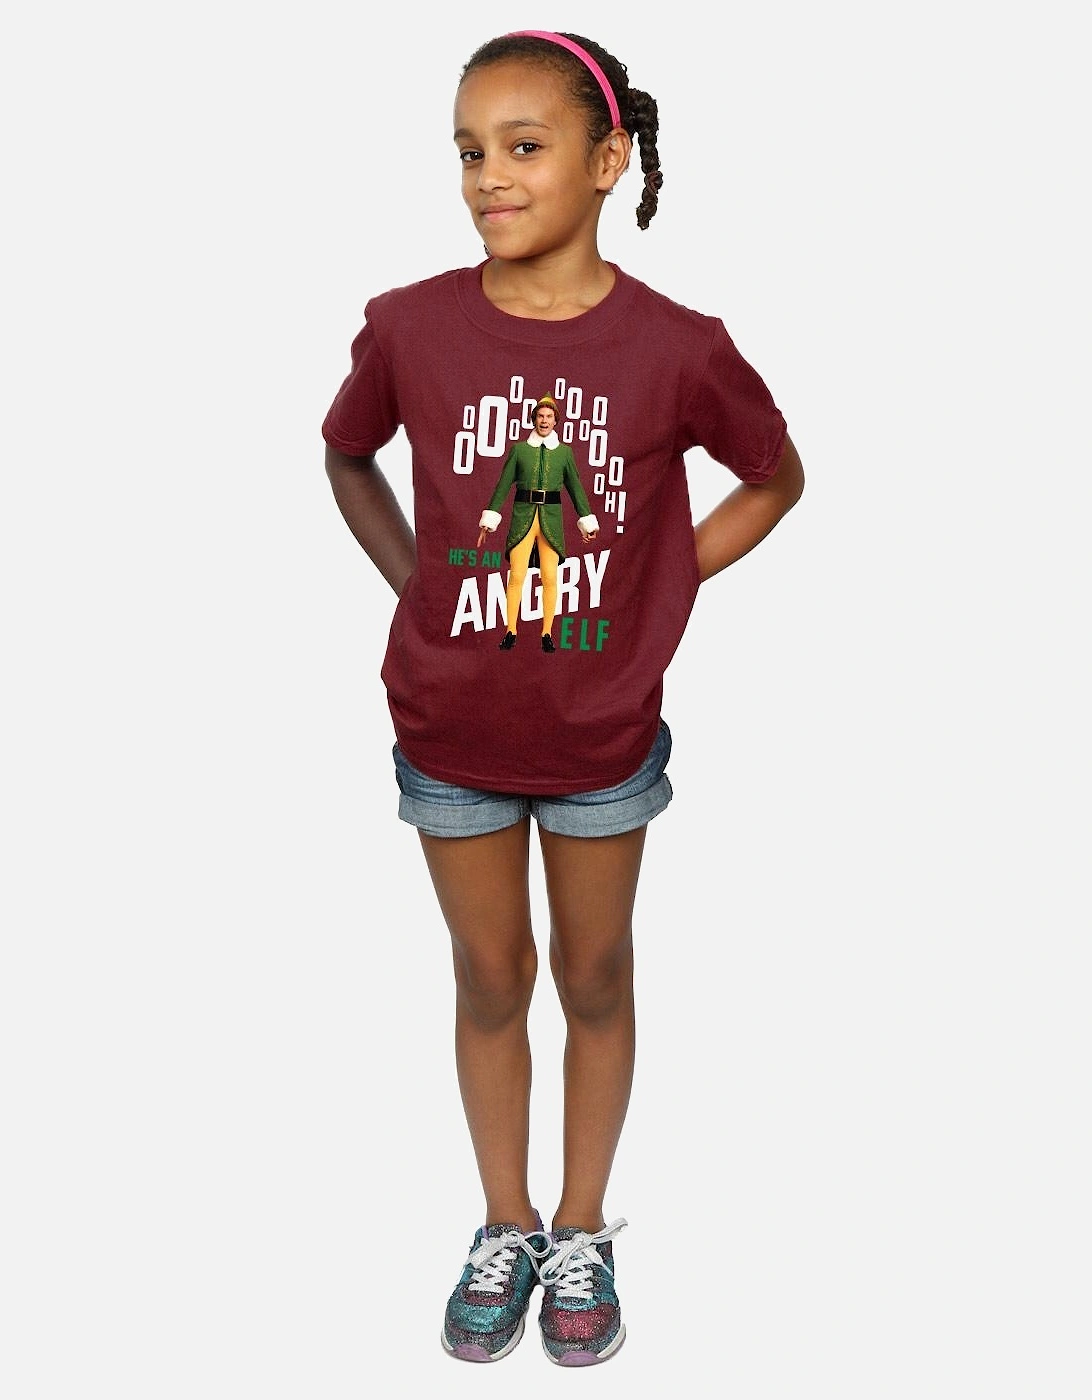 Girls Angry Cotton T-Shirt